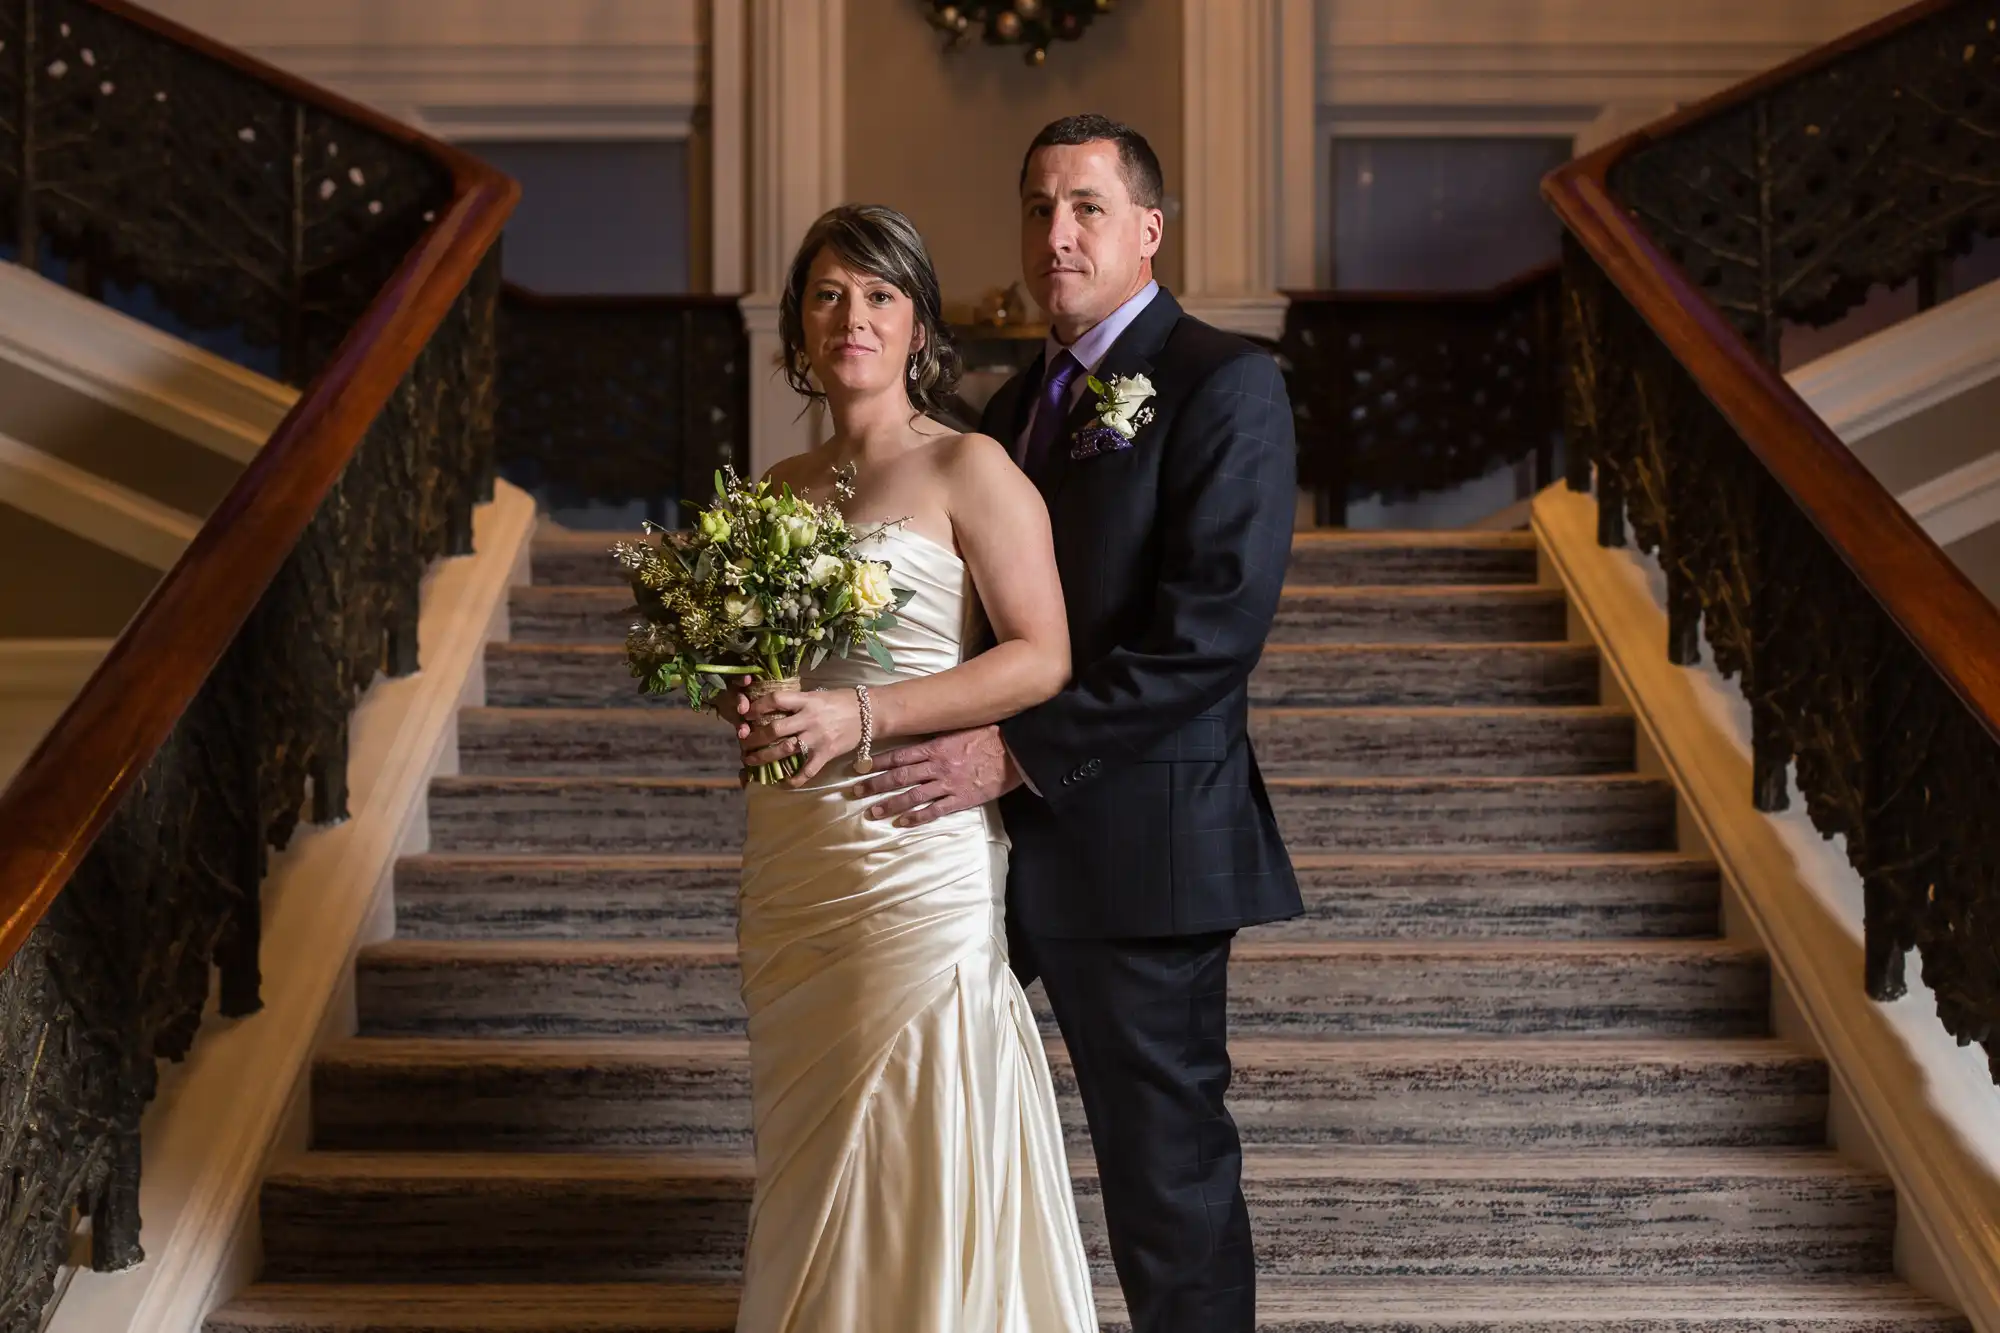 A bride and groom standing together on a staircase, the bride holding a bouquet, both looking slightly to the side.